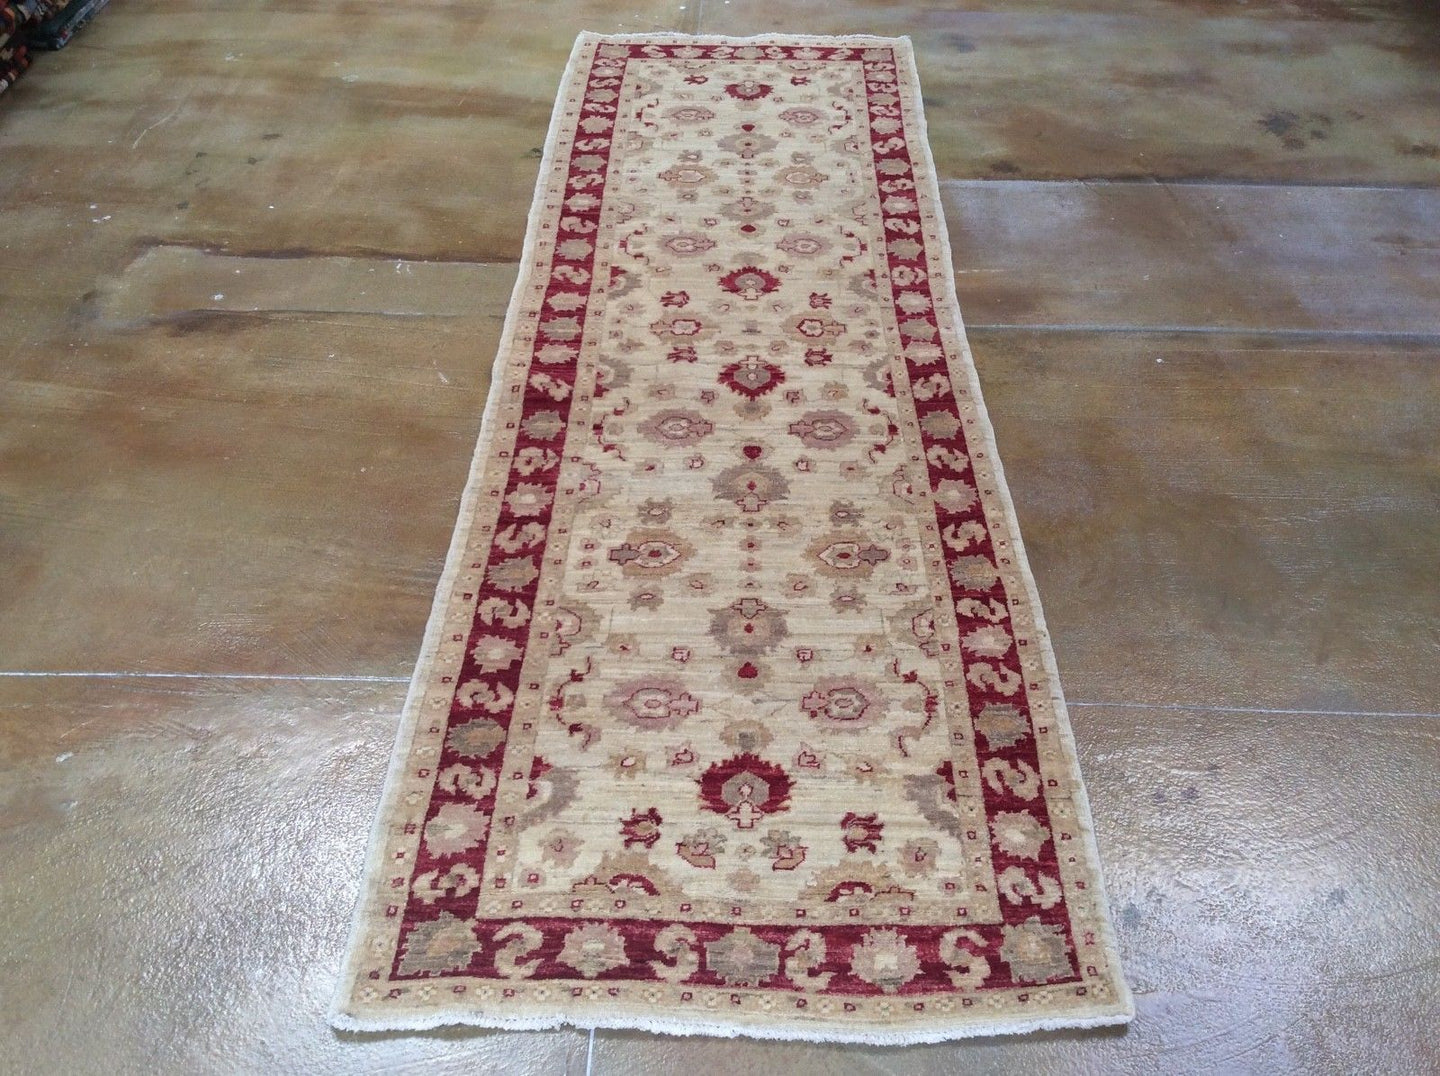 Oriental rugs, hand-knotted carpets, sustainable rugs, classic world oriental rugs, handmade, United States, interior design,  Brrsf-393